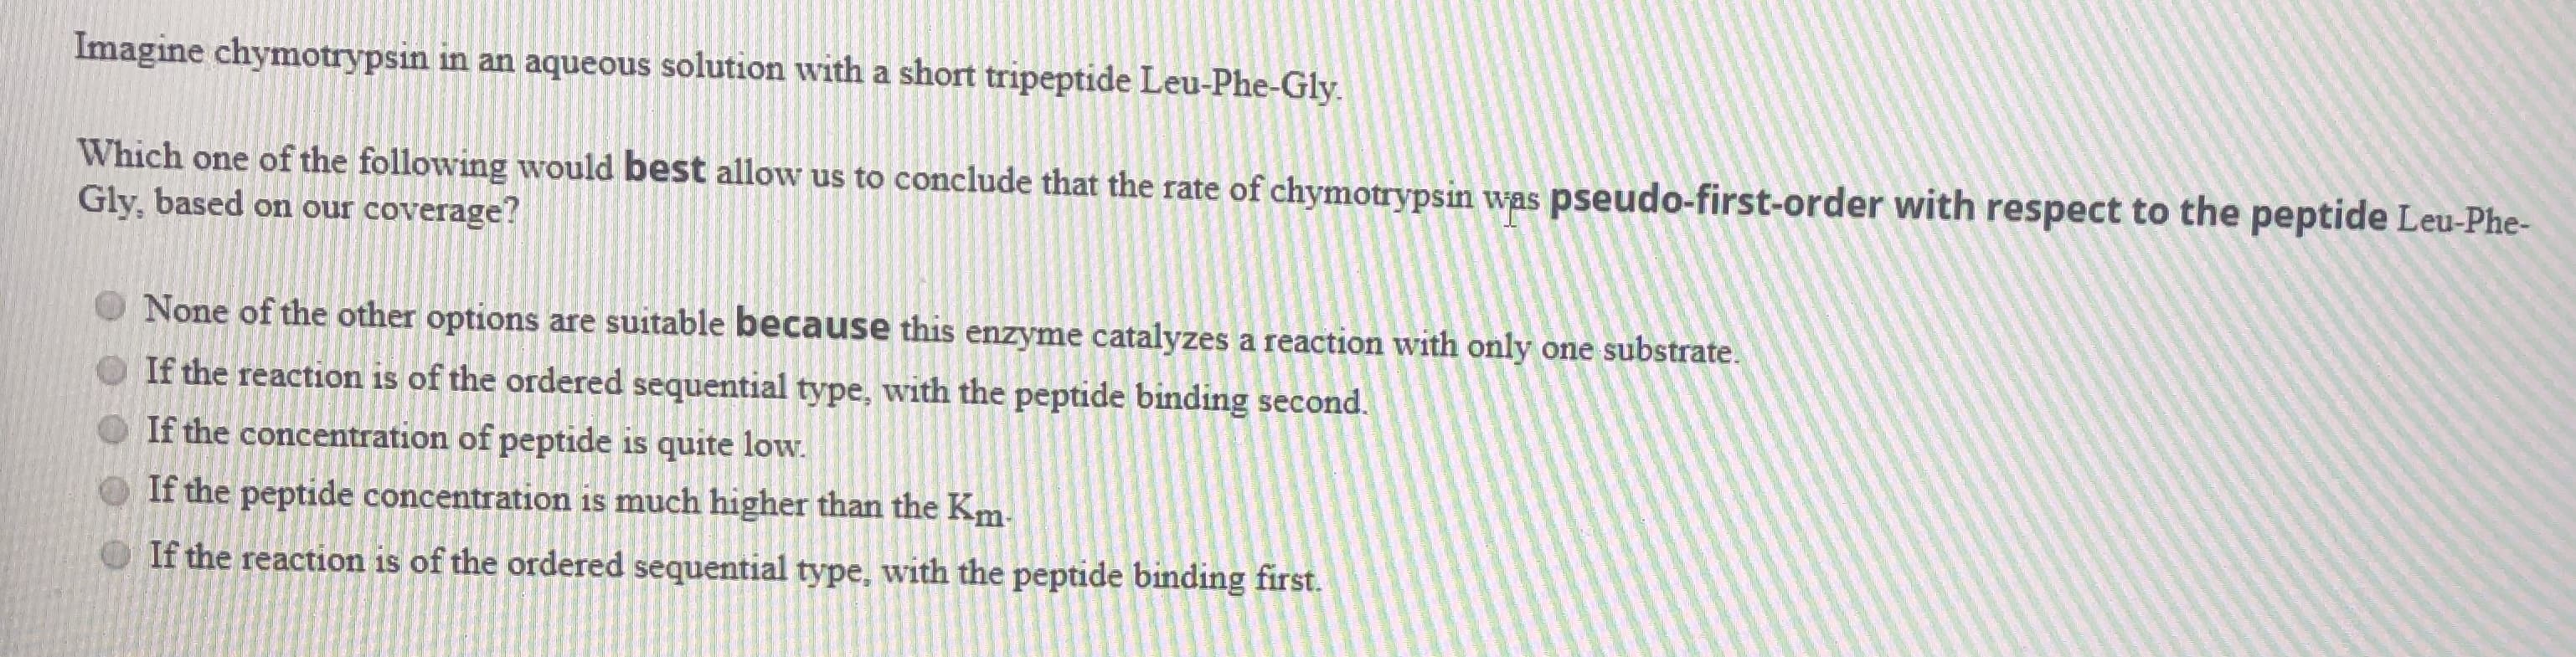 Which one of the following would best allow us to conclude that the rate of chymotrypsin was pseudo-first-order with respect to the peptide Leu-Phe-
Gly, based on our coverage?
O None of the other options are suitable because this enzyme catalyzes a reaction with only one substrate.
O If the reaction is of the ordered sequential type, with the peptide binding second.
O If the concentration of peptide is quite low.
O If the peptide concentration is much higher than the Km.
O If the reaction is of the ordered sequential type, with the peptide binding first.
